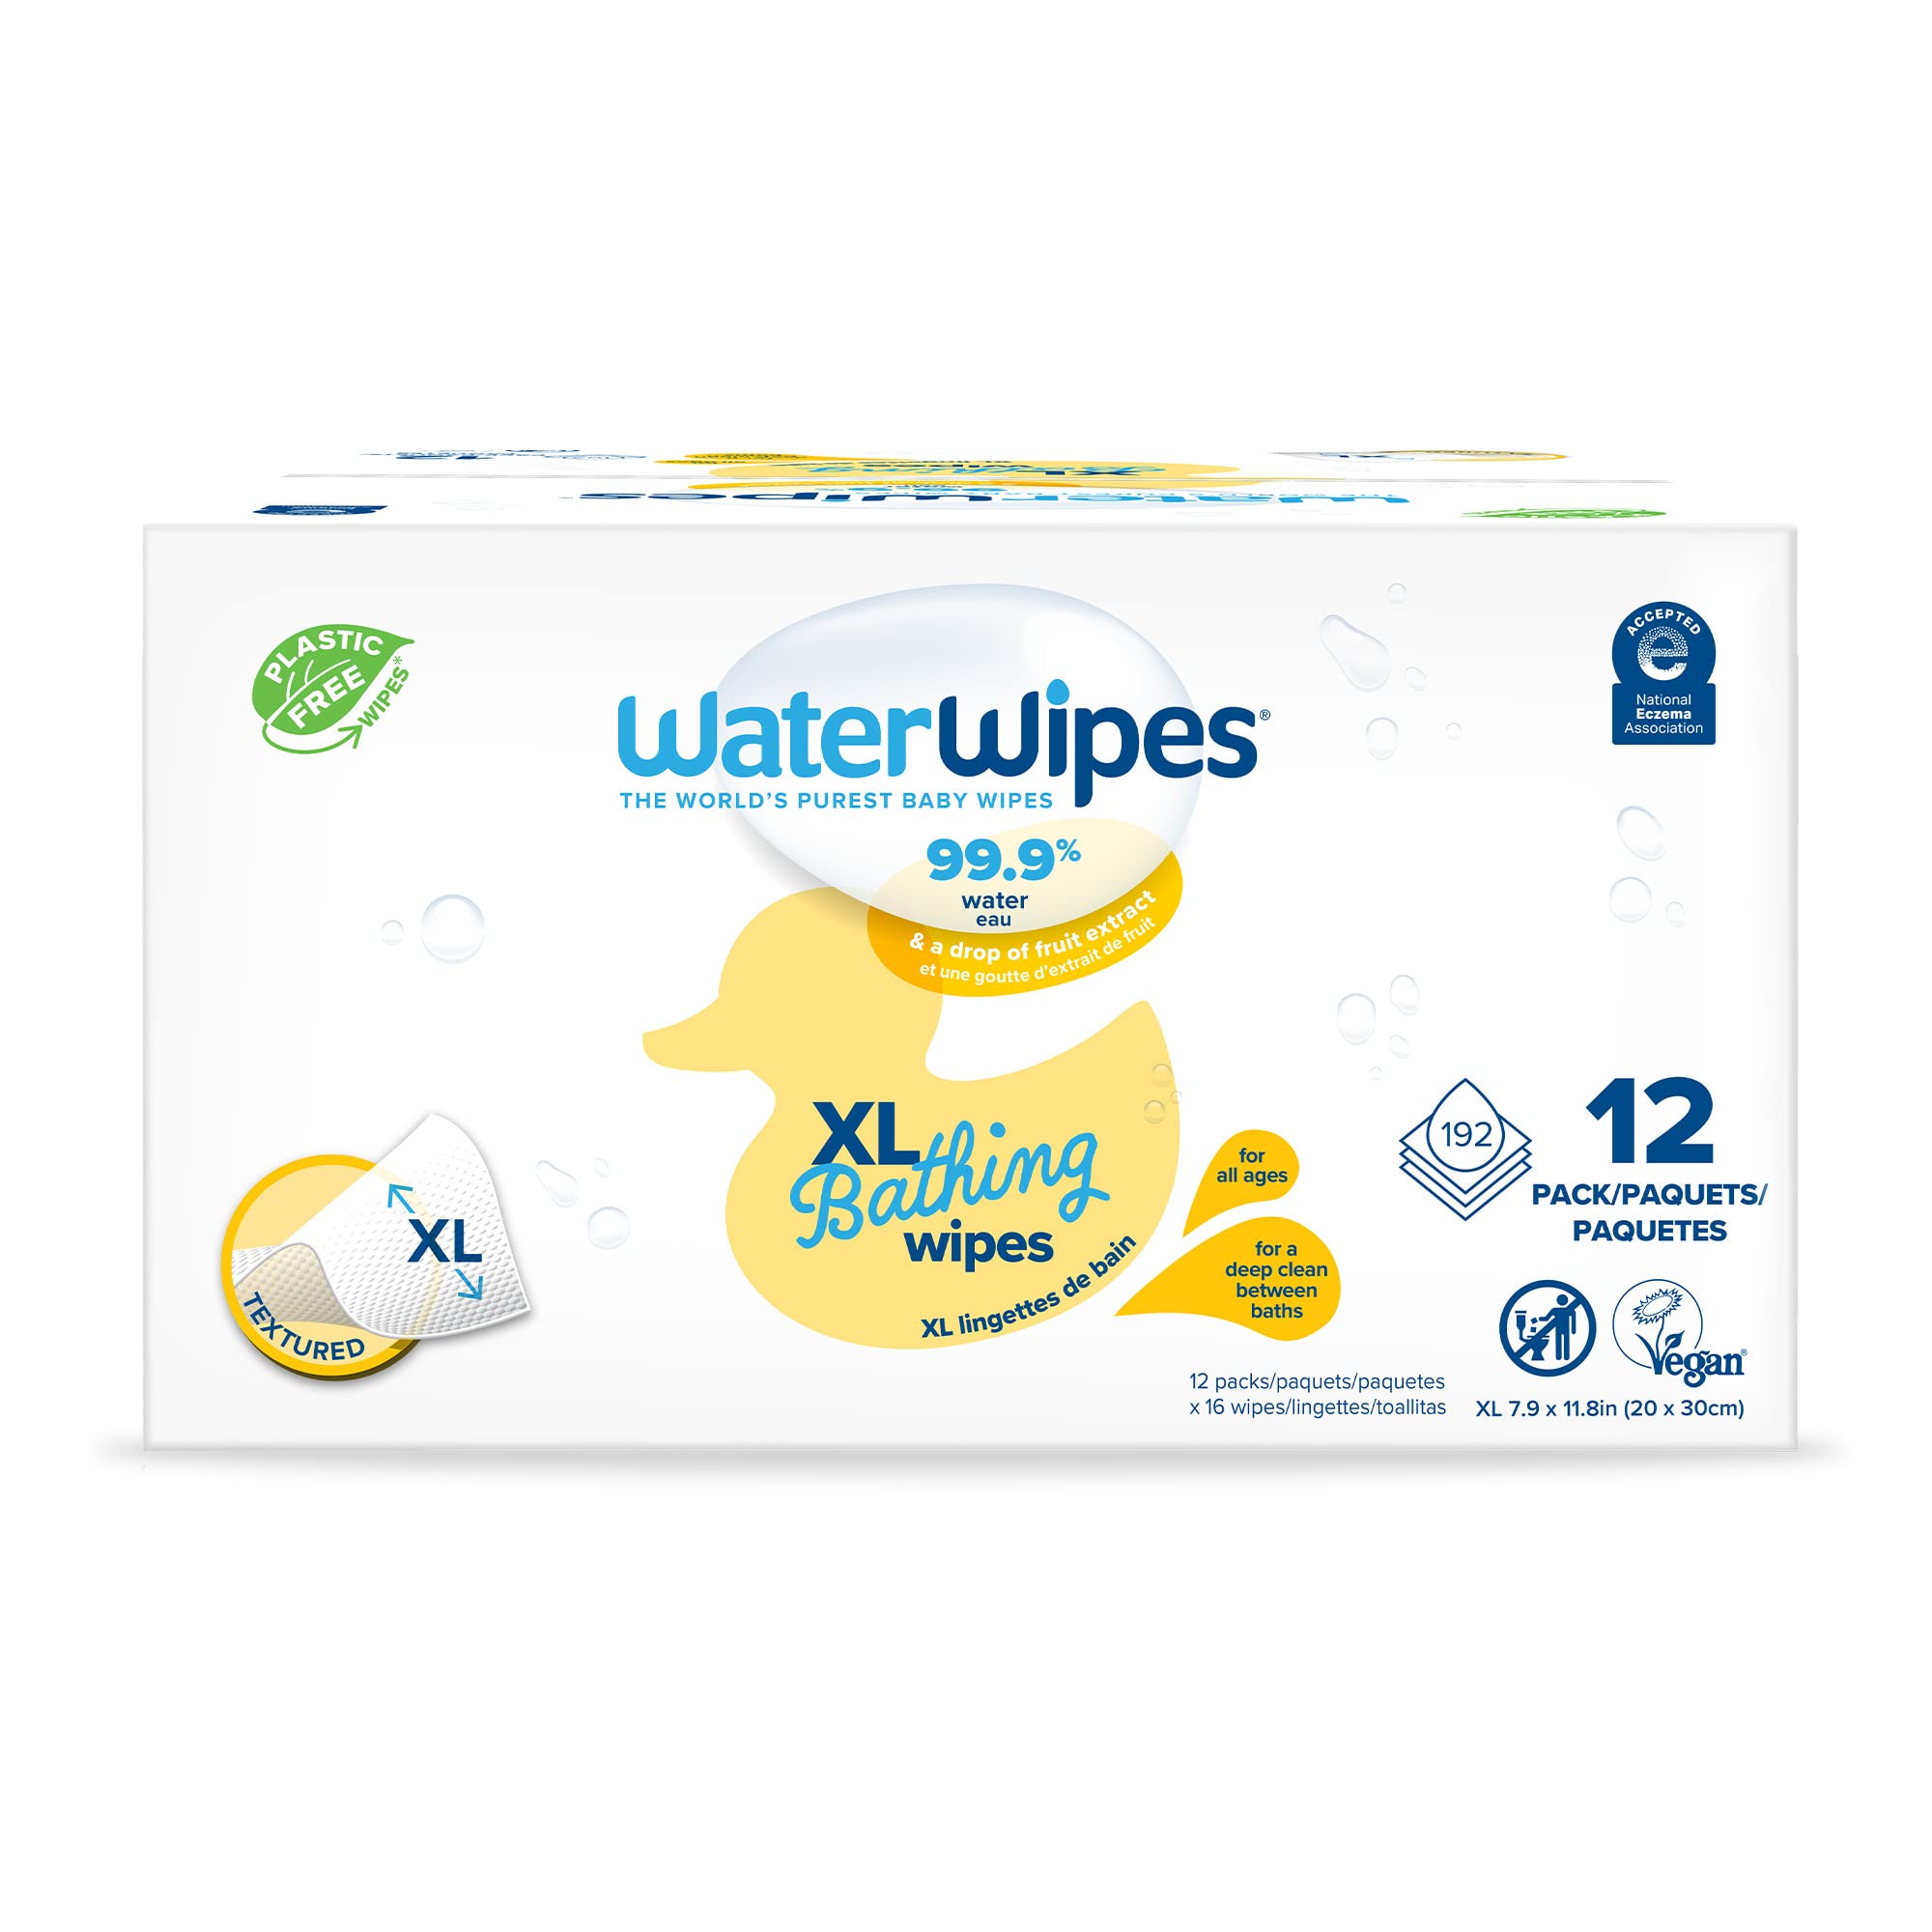 WaterWipes Plastic-Free, Rinse-Free, XL Bathing Wipes, 99.9% Water Based Wipes, Unscented & Hypoallergenic for Sensitive Skin, 192 Count (12 packs), Packaging May Vary